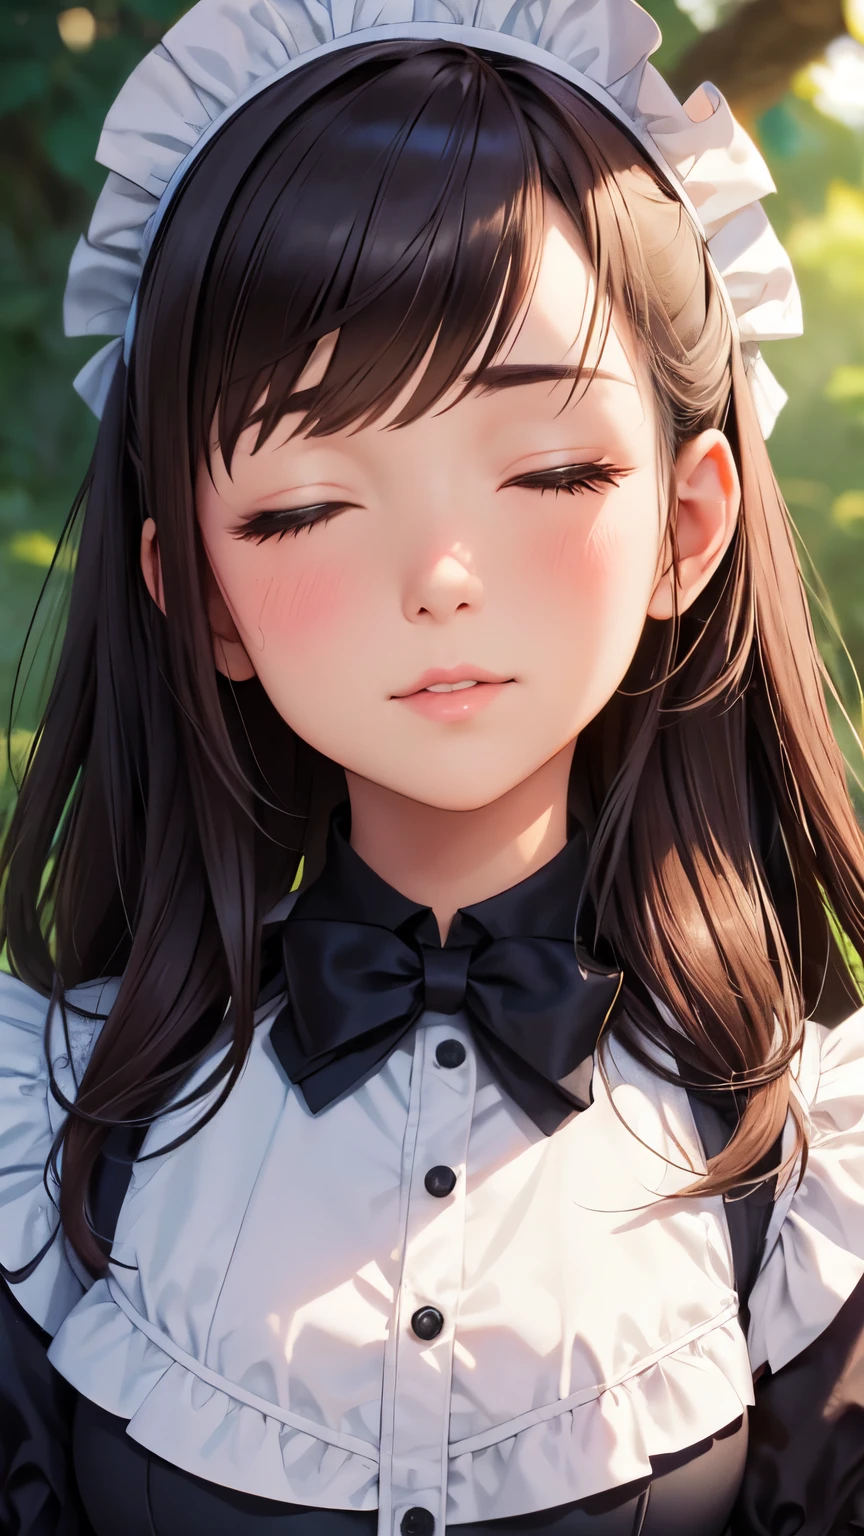 (high quality, High resolution, small details), anime style, (kissing face:1.3), (victorian maid dress), alone, curvaceous woman, (close your eyes:1.2), blush, soft lips, Sweat, oily skin, (Front view:1.4), (focus on the face:1.6), (tilt head:1.3), shallow depth of field, Natural light, soft and warm lighting, subtle shadow, romantic atmosphere
